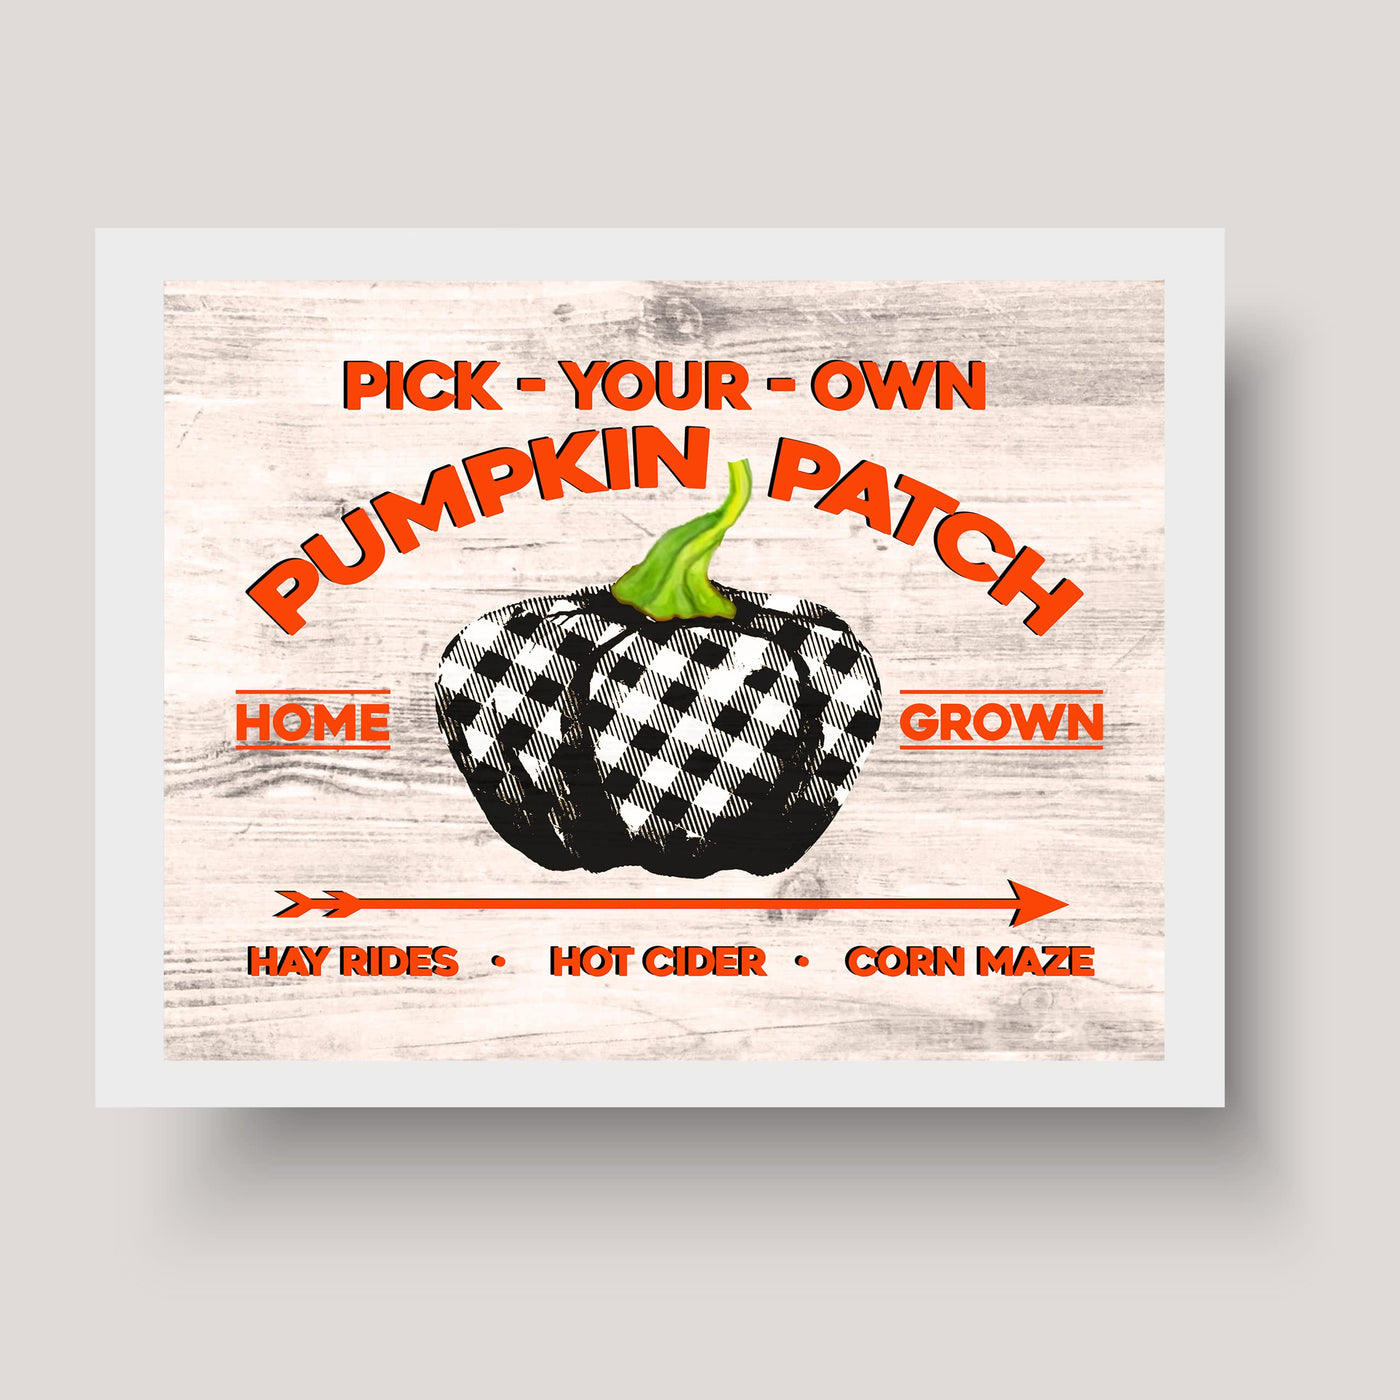 Pumpkin Patch-Hay Rides-Hot Cider-Vintage Fall Wall Art Decor -10 x 8" Rustic Farmhouse Pumpkin Print -Ready to Frame. Perfect for Home-Halloween-Thanksgiving Decor! Printed on Photo Paper.